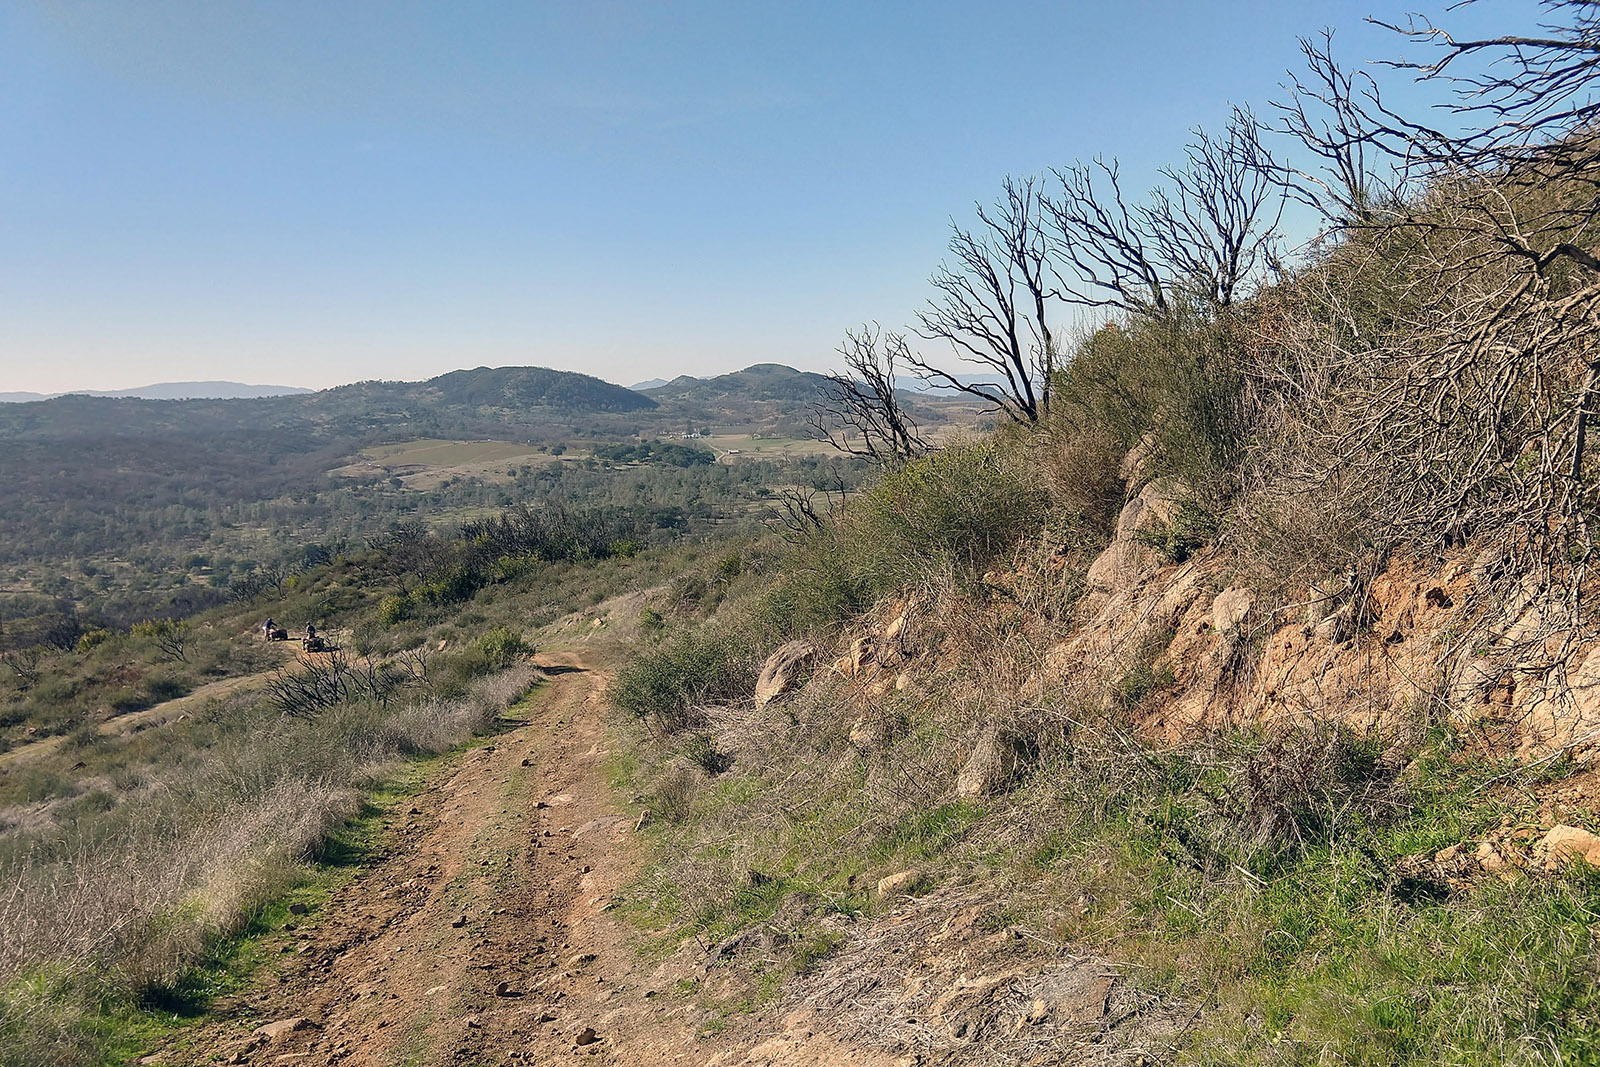 A completed section of Land Trust of Napa County’s Aetna Springs fuel break. Photo by Mike Palladini – Land Trust of Napa County.